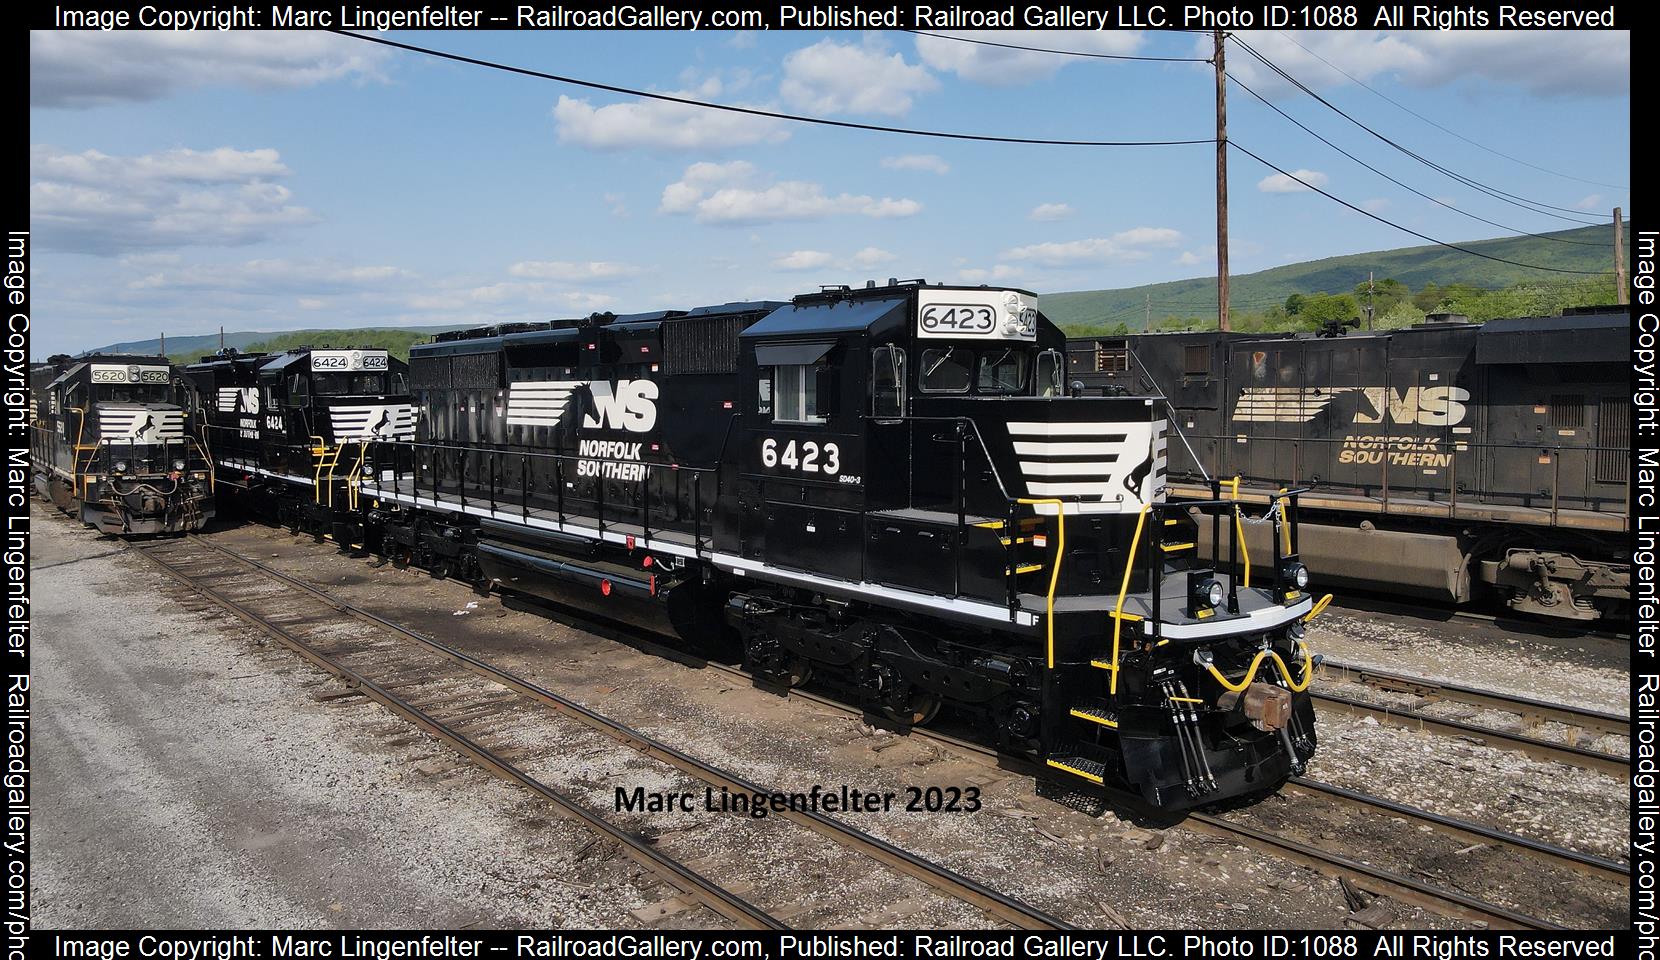 NS 6423 is a class EMD SD40-3 and  is pictured in Altoona, Pennsylvania, USA.  This was taken along the NS Juniata Shops on the Norfolk Southern. Photo Copyright: Marc Lingenfelter uploaded to Railroad Gallery on 05/22/2023. This photograph of NS 6423 was taken on Tuesday, May 23, 2023. All Rights Reserved. 